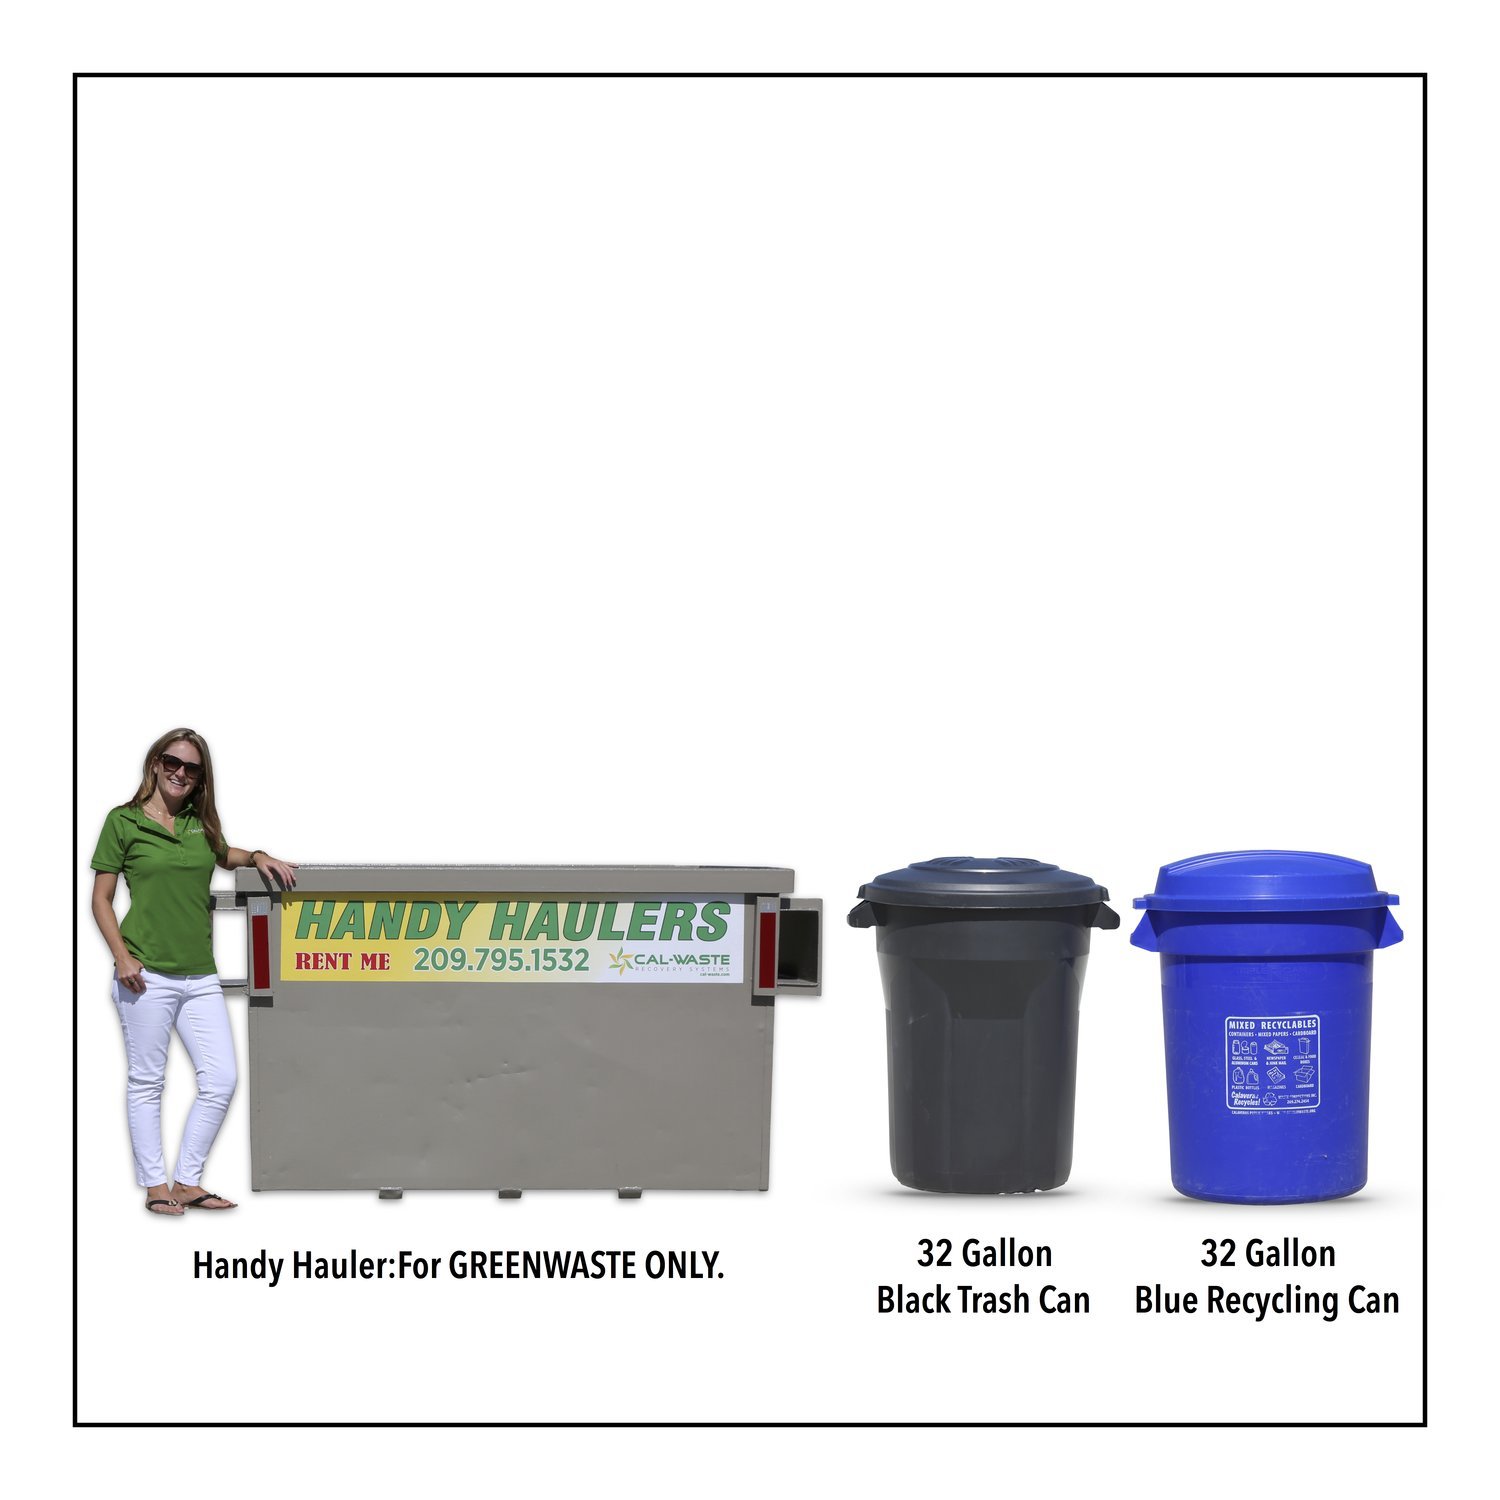 Cal-Waste CAN Service - 32 Gallon Trash & Recycling, Yearly Yard & Garden Handy Hauler - 3 MONTHS FREE